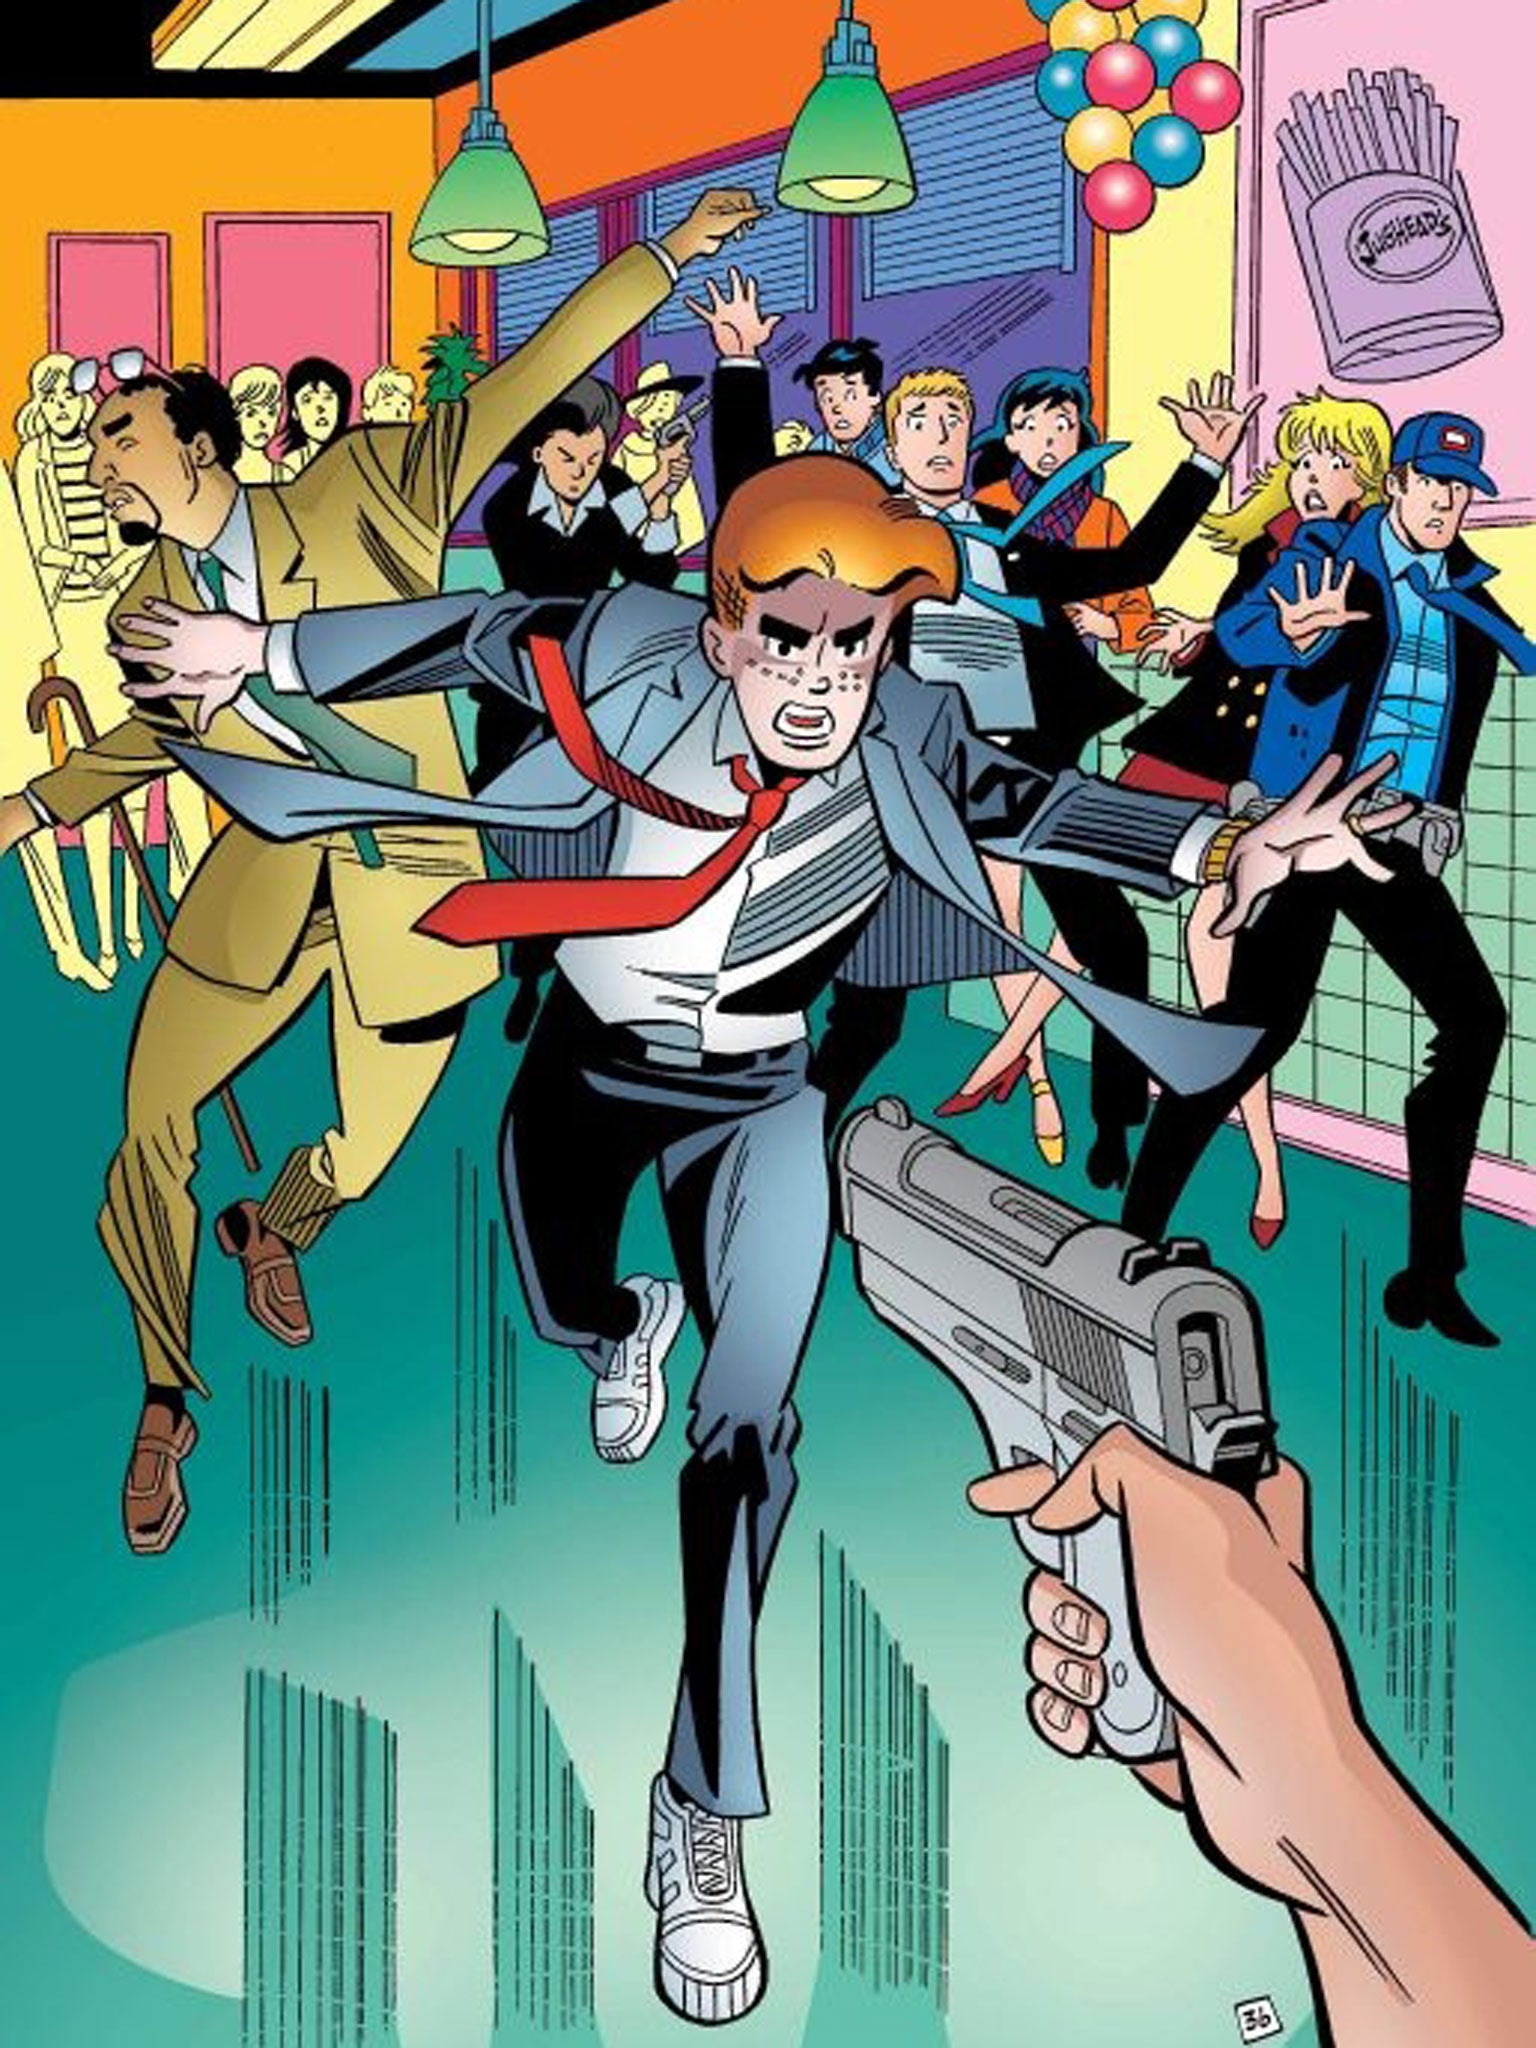 Archie Andrews, the redheaded American teenager in the "Archie" comic book series